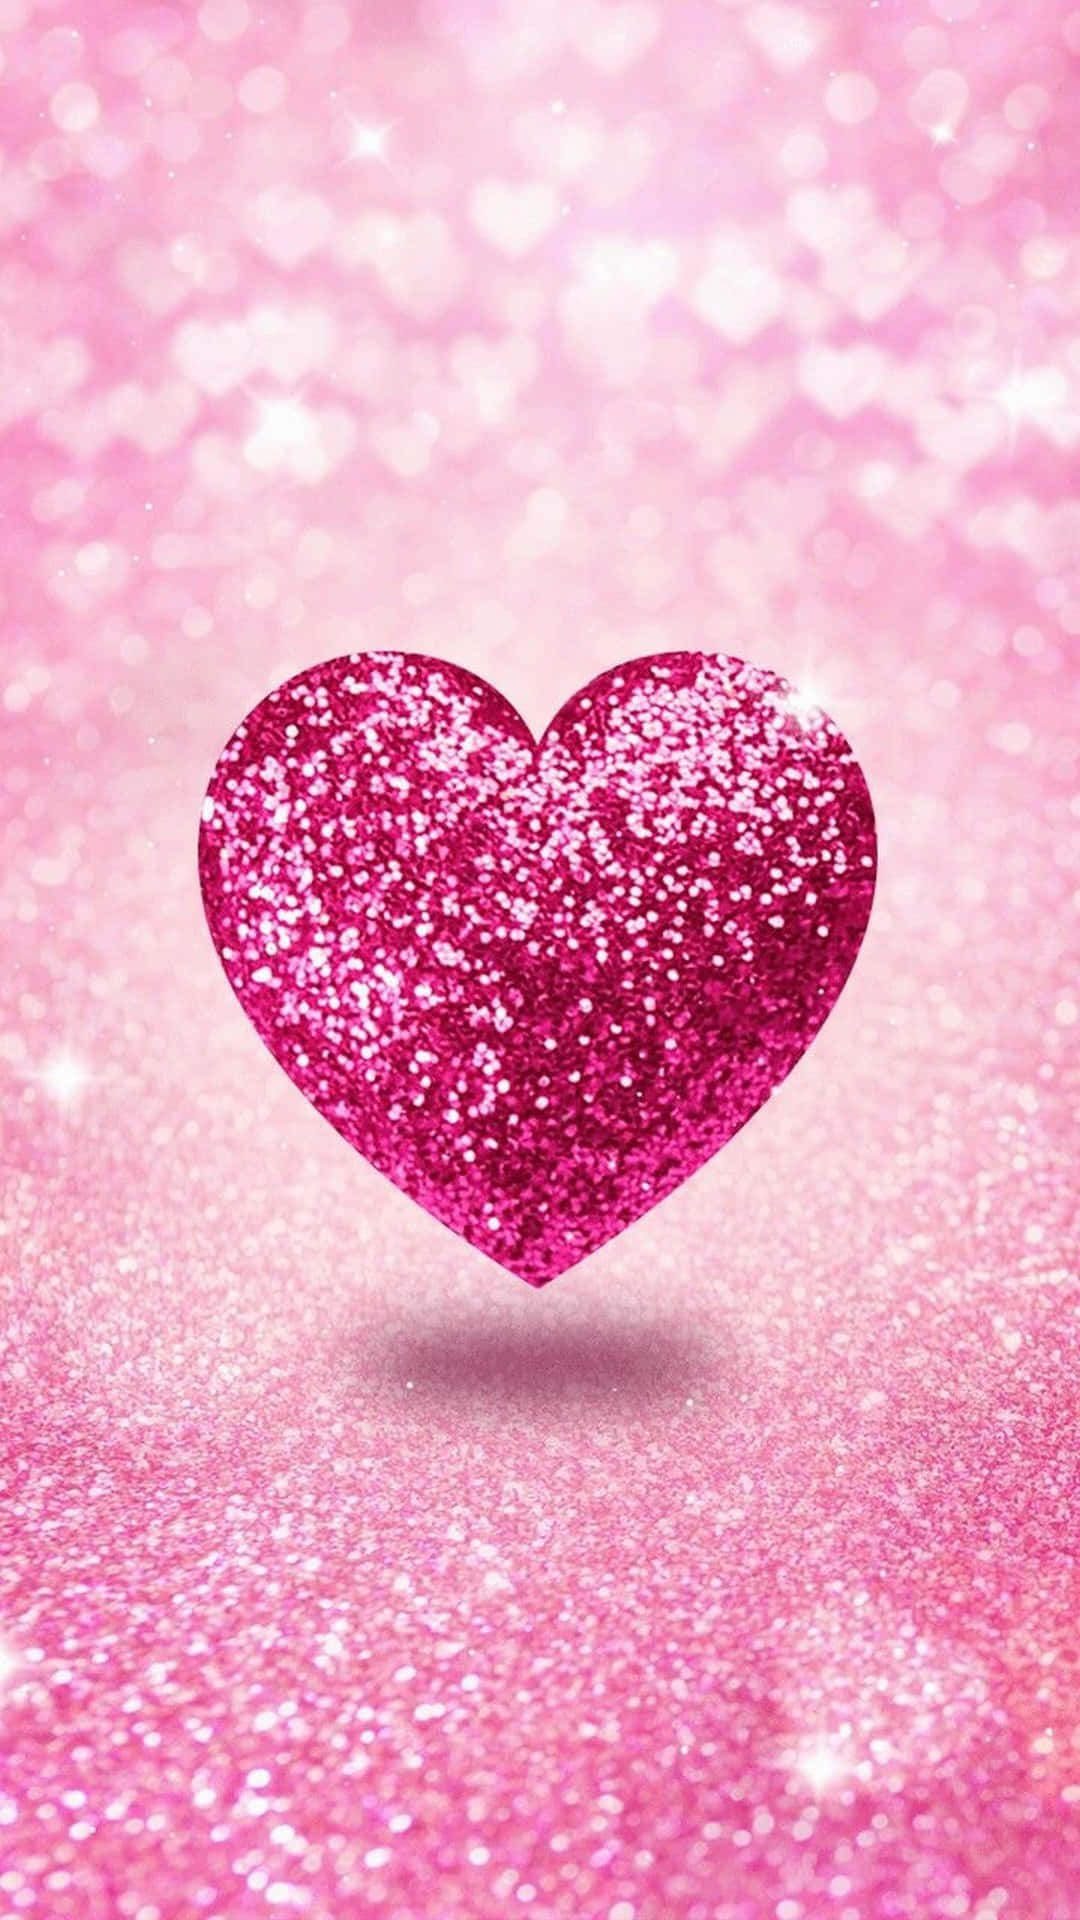 Love Manifested: An Enchanting Pink Heart Background